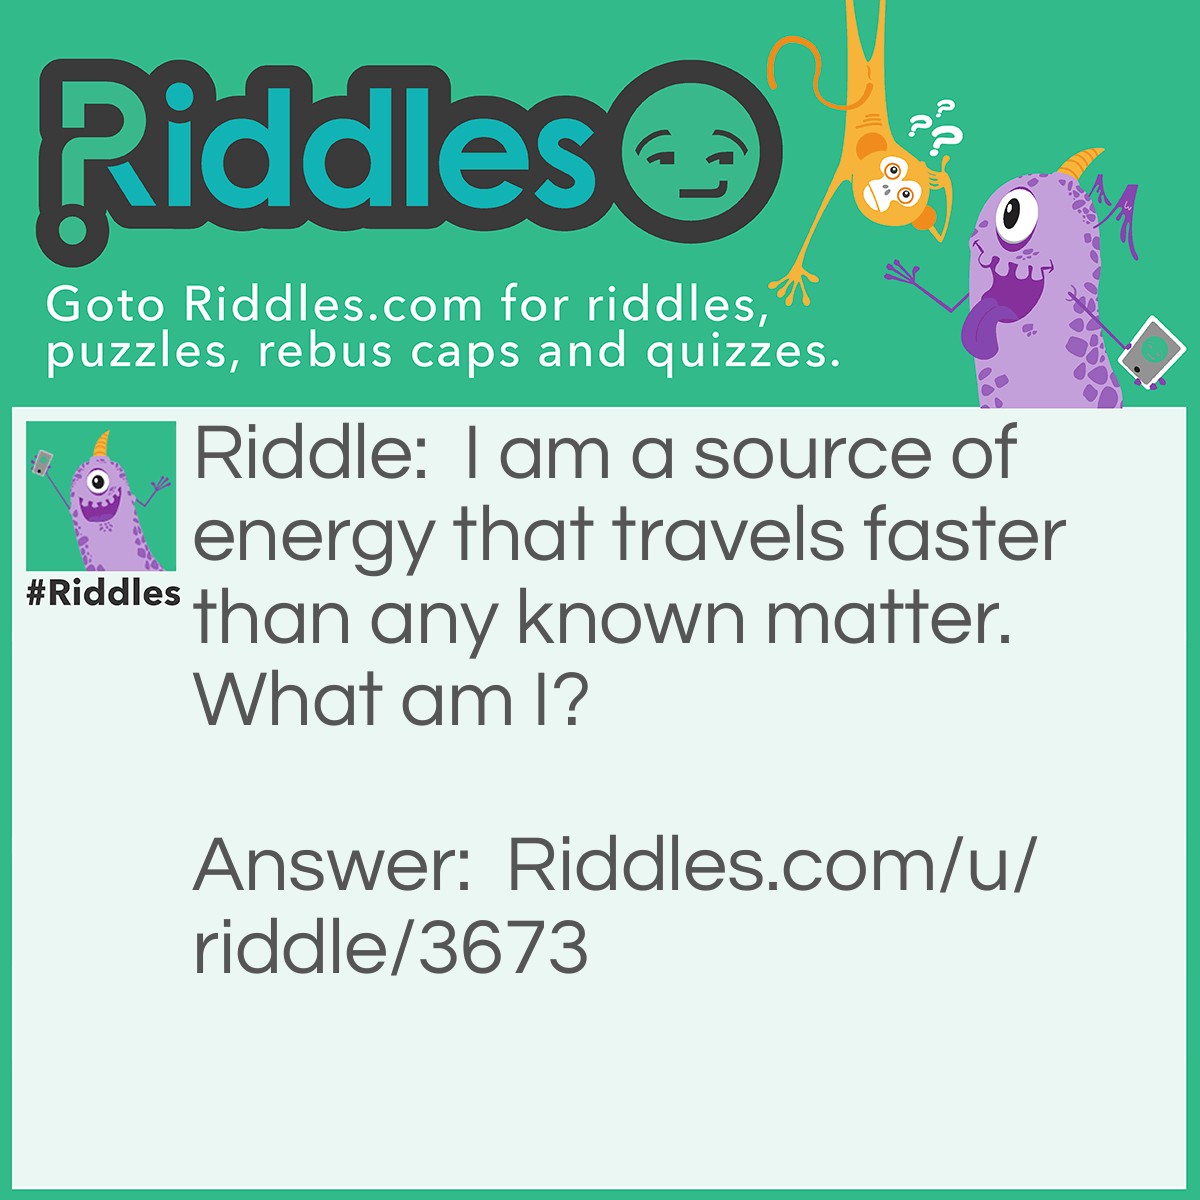 Riddle: I am a source of energy that travels faster than any known matter. What am I? Answer: Light.